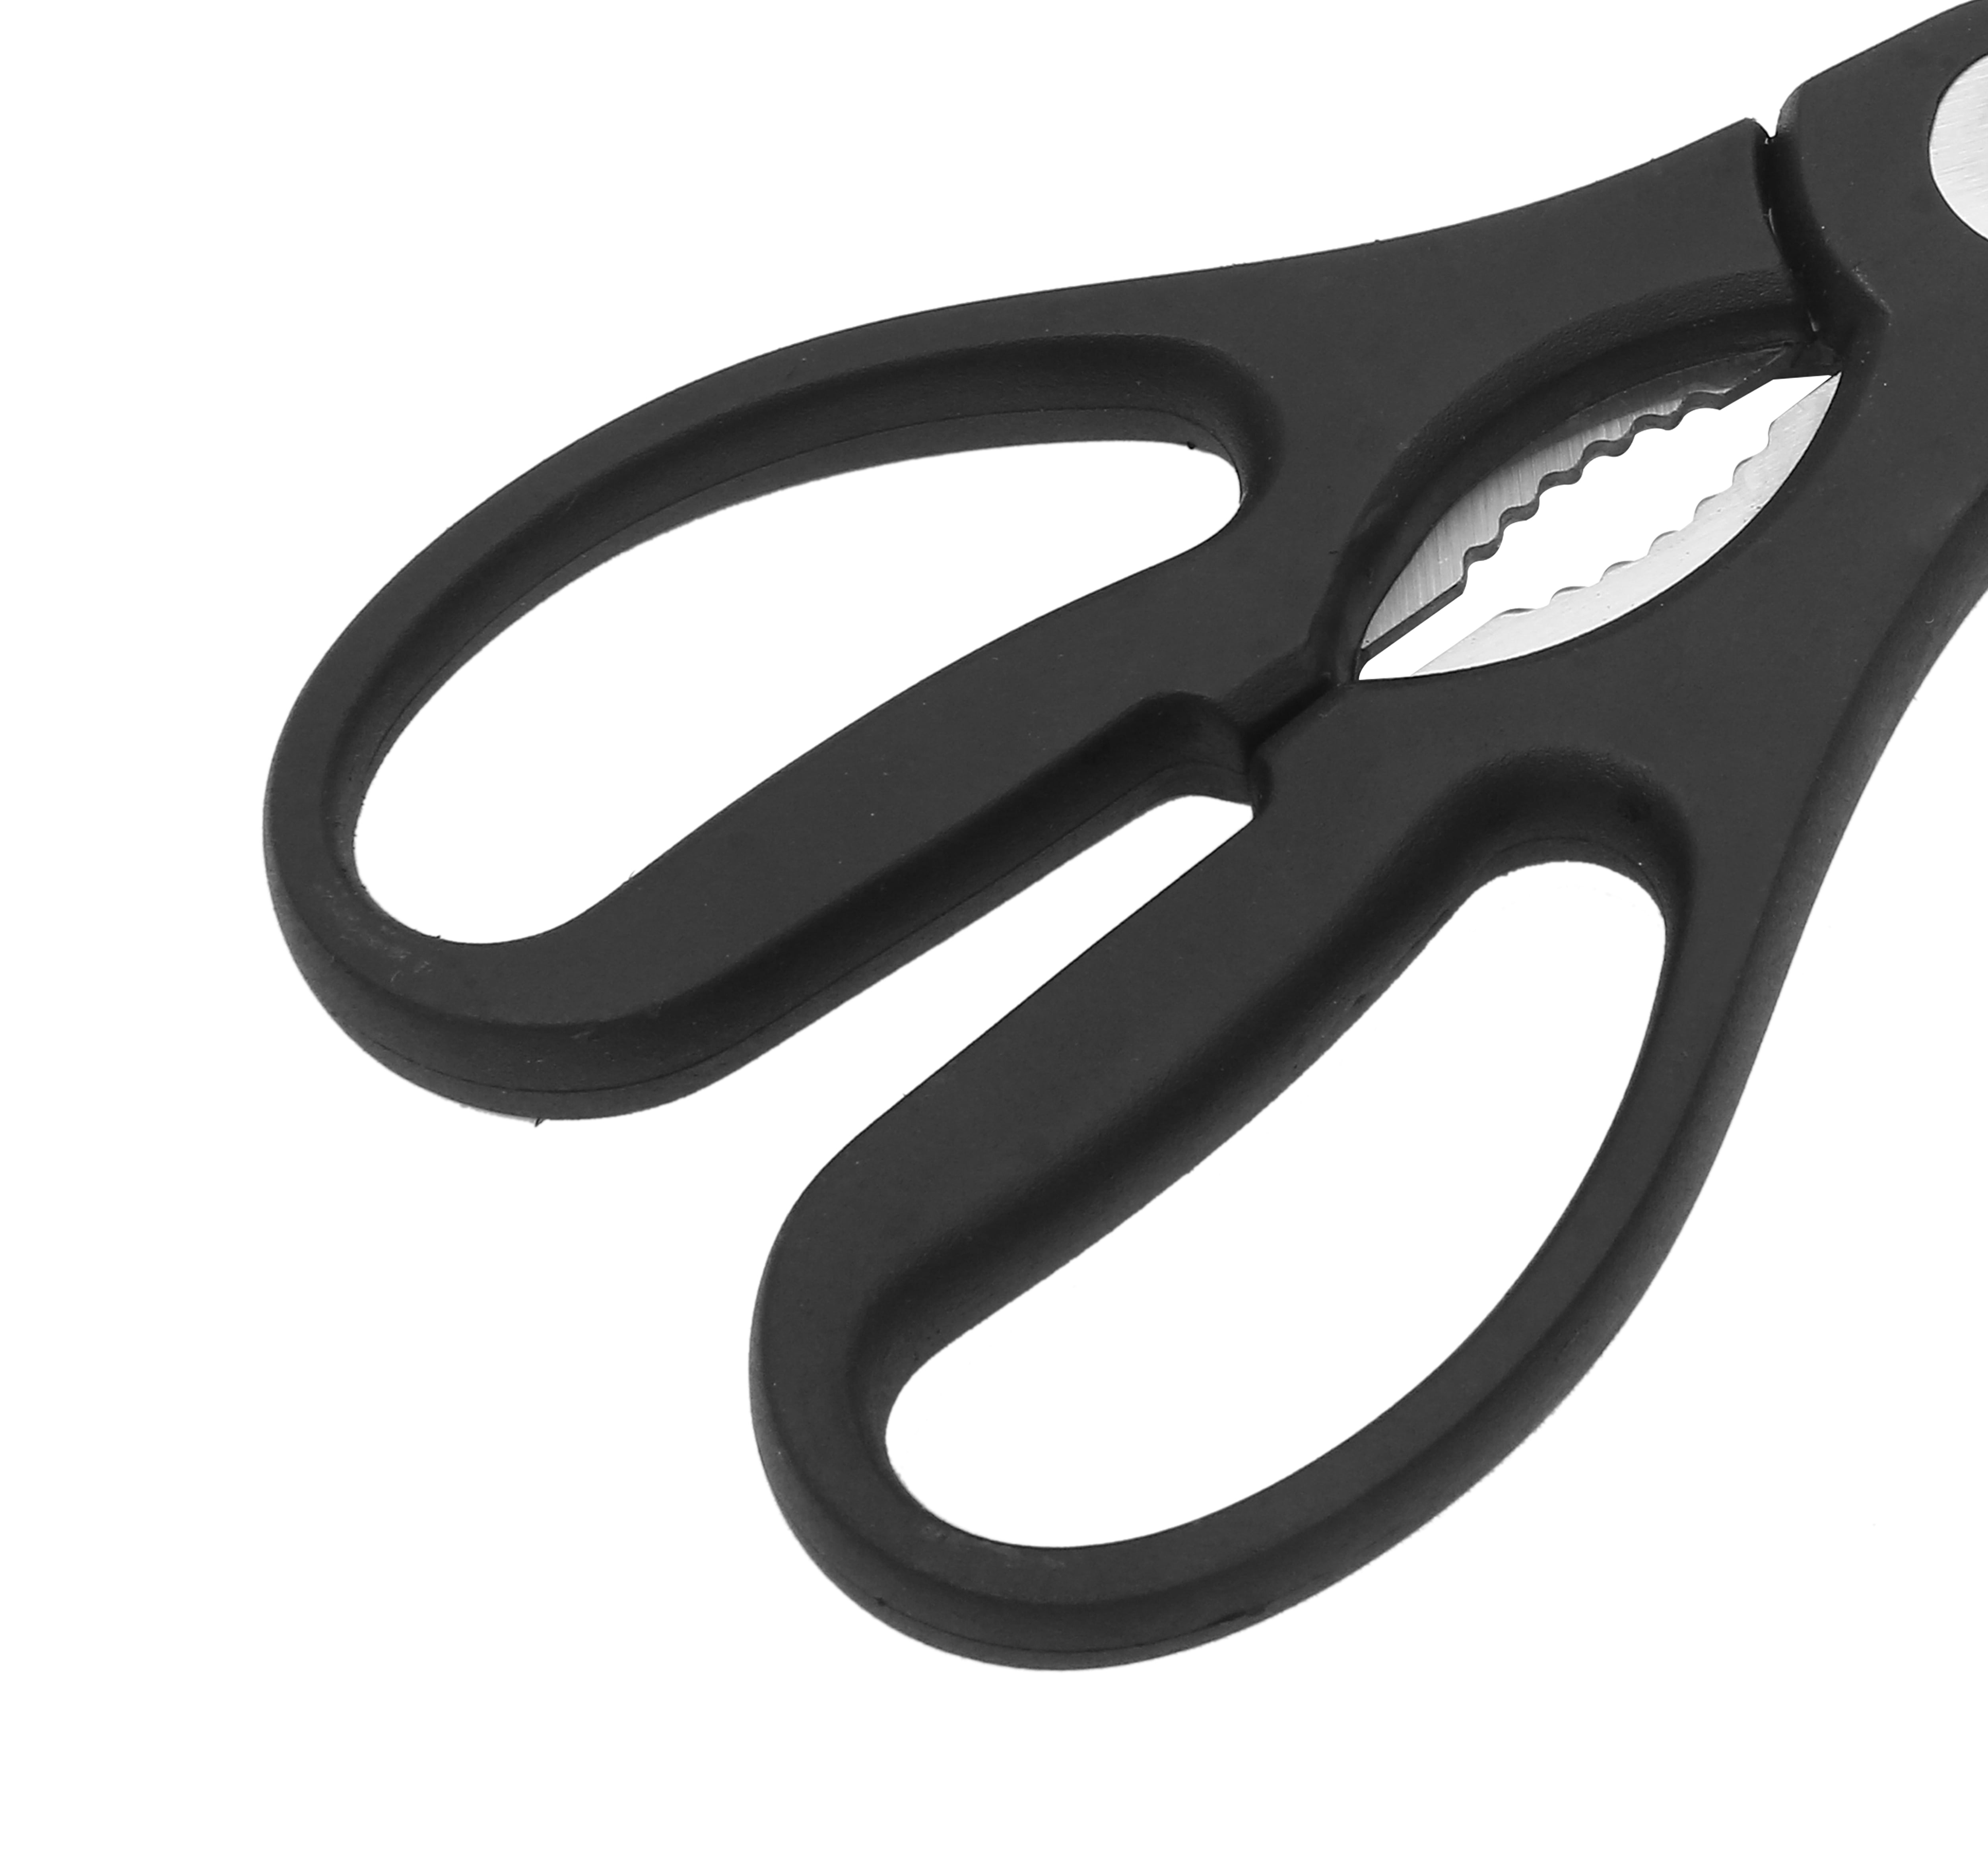 General Purpose Stainless Steel Scissors by Universal® UNV92019